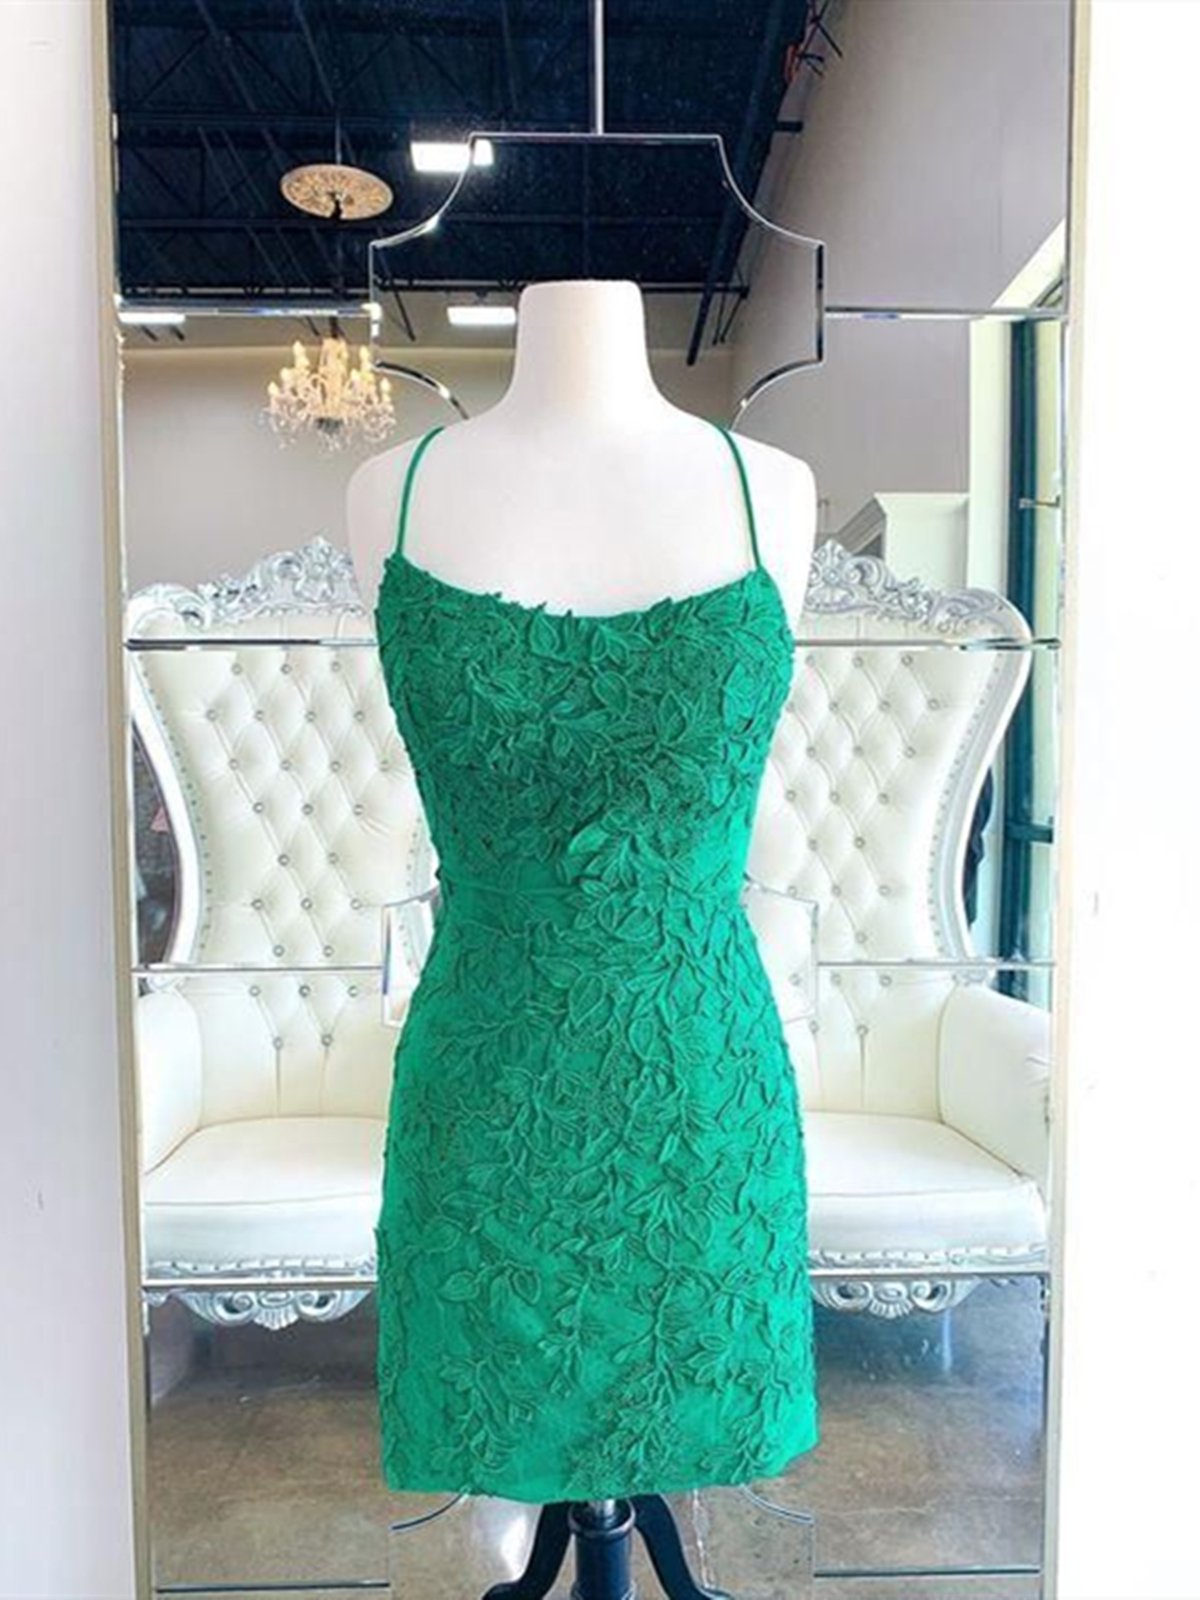 Backless Short Green Lace Prom Dresses, Open Back Short Green Lace Homecoming Graduation Dresses